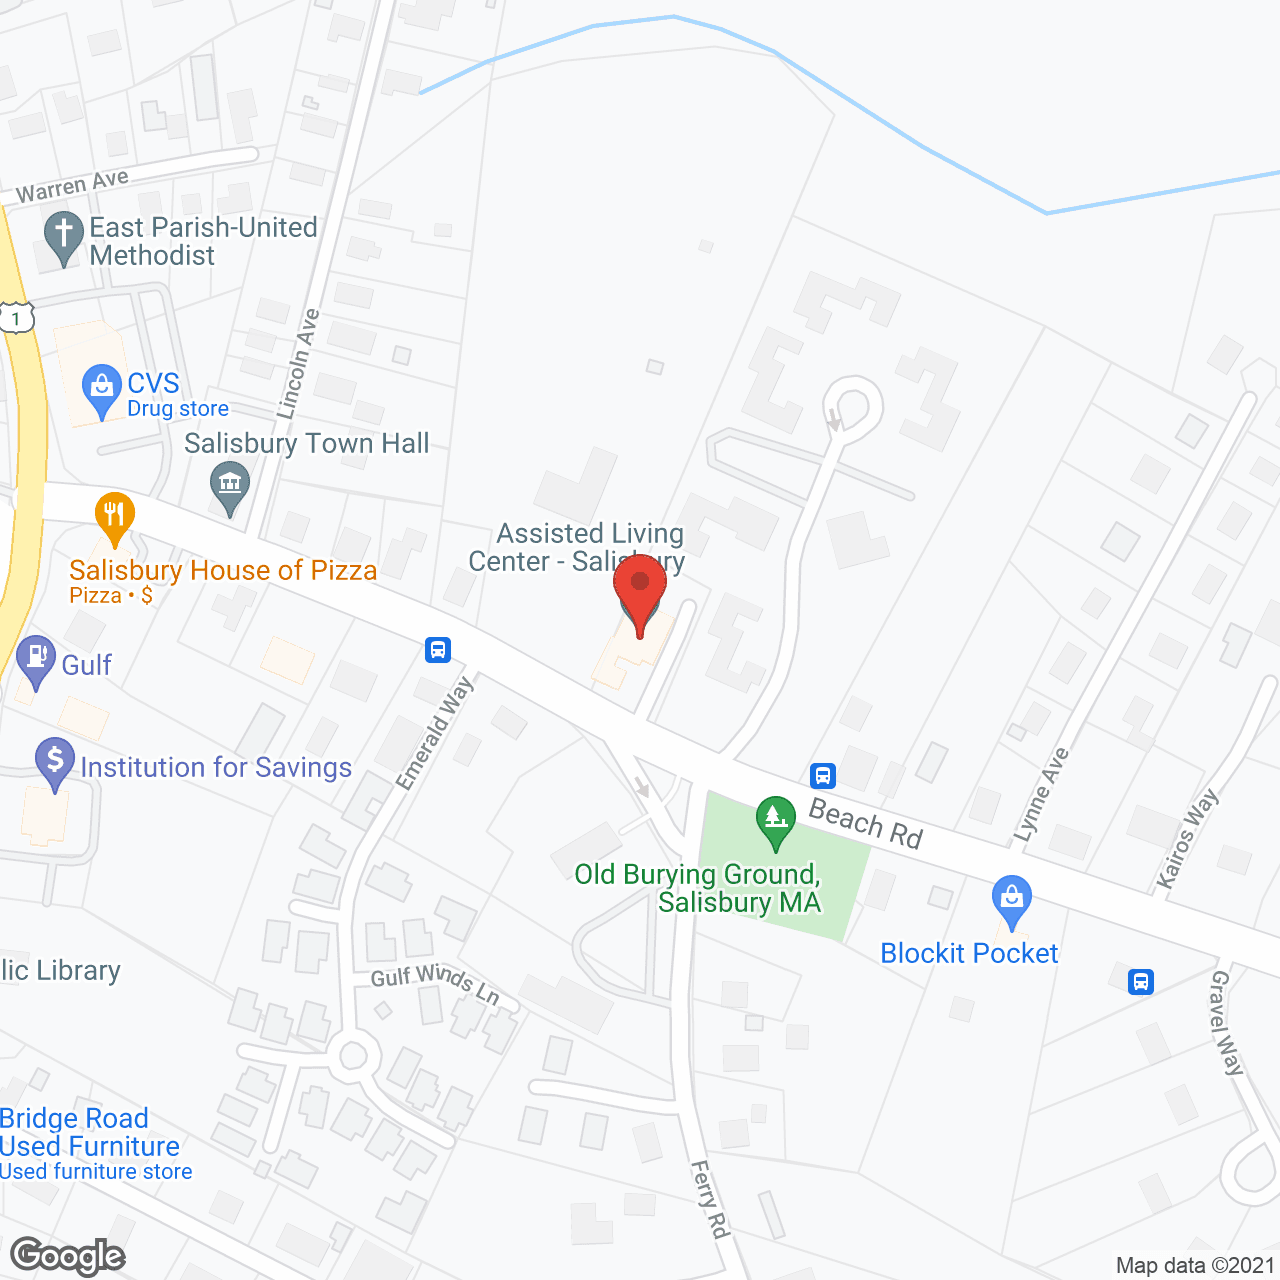 Assisted Living Center of Salisbury in google map